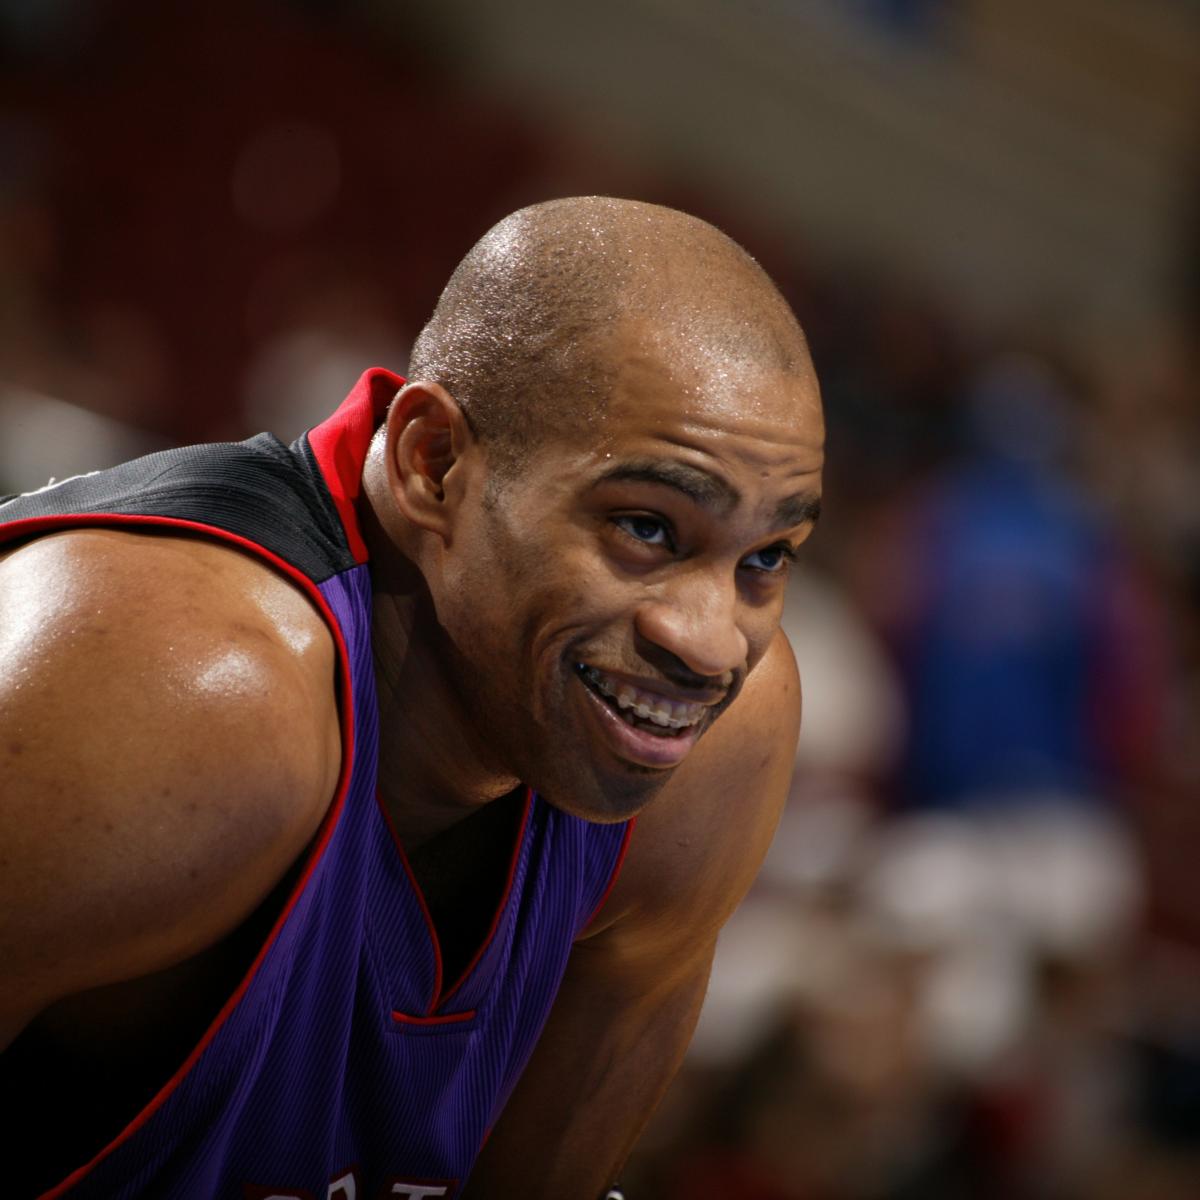 SPORTY STREETER: Should Vince Carter's Raps jersey be retired?